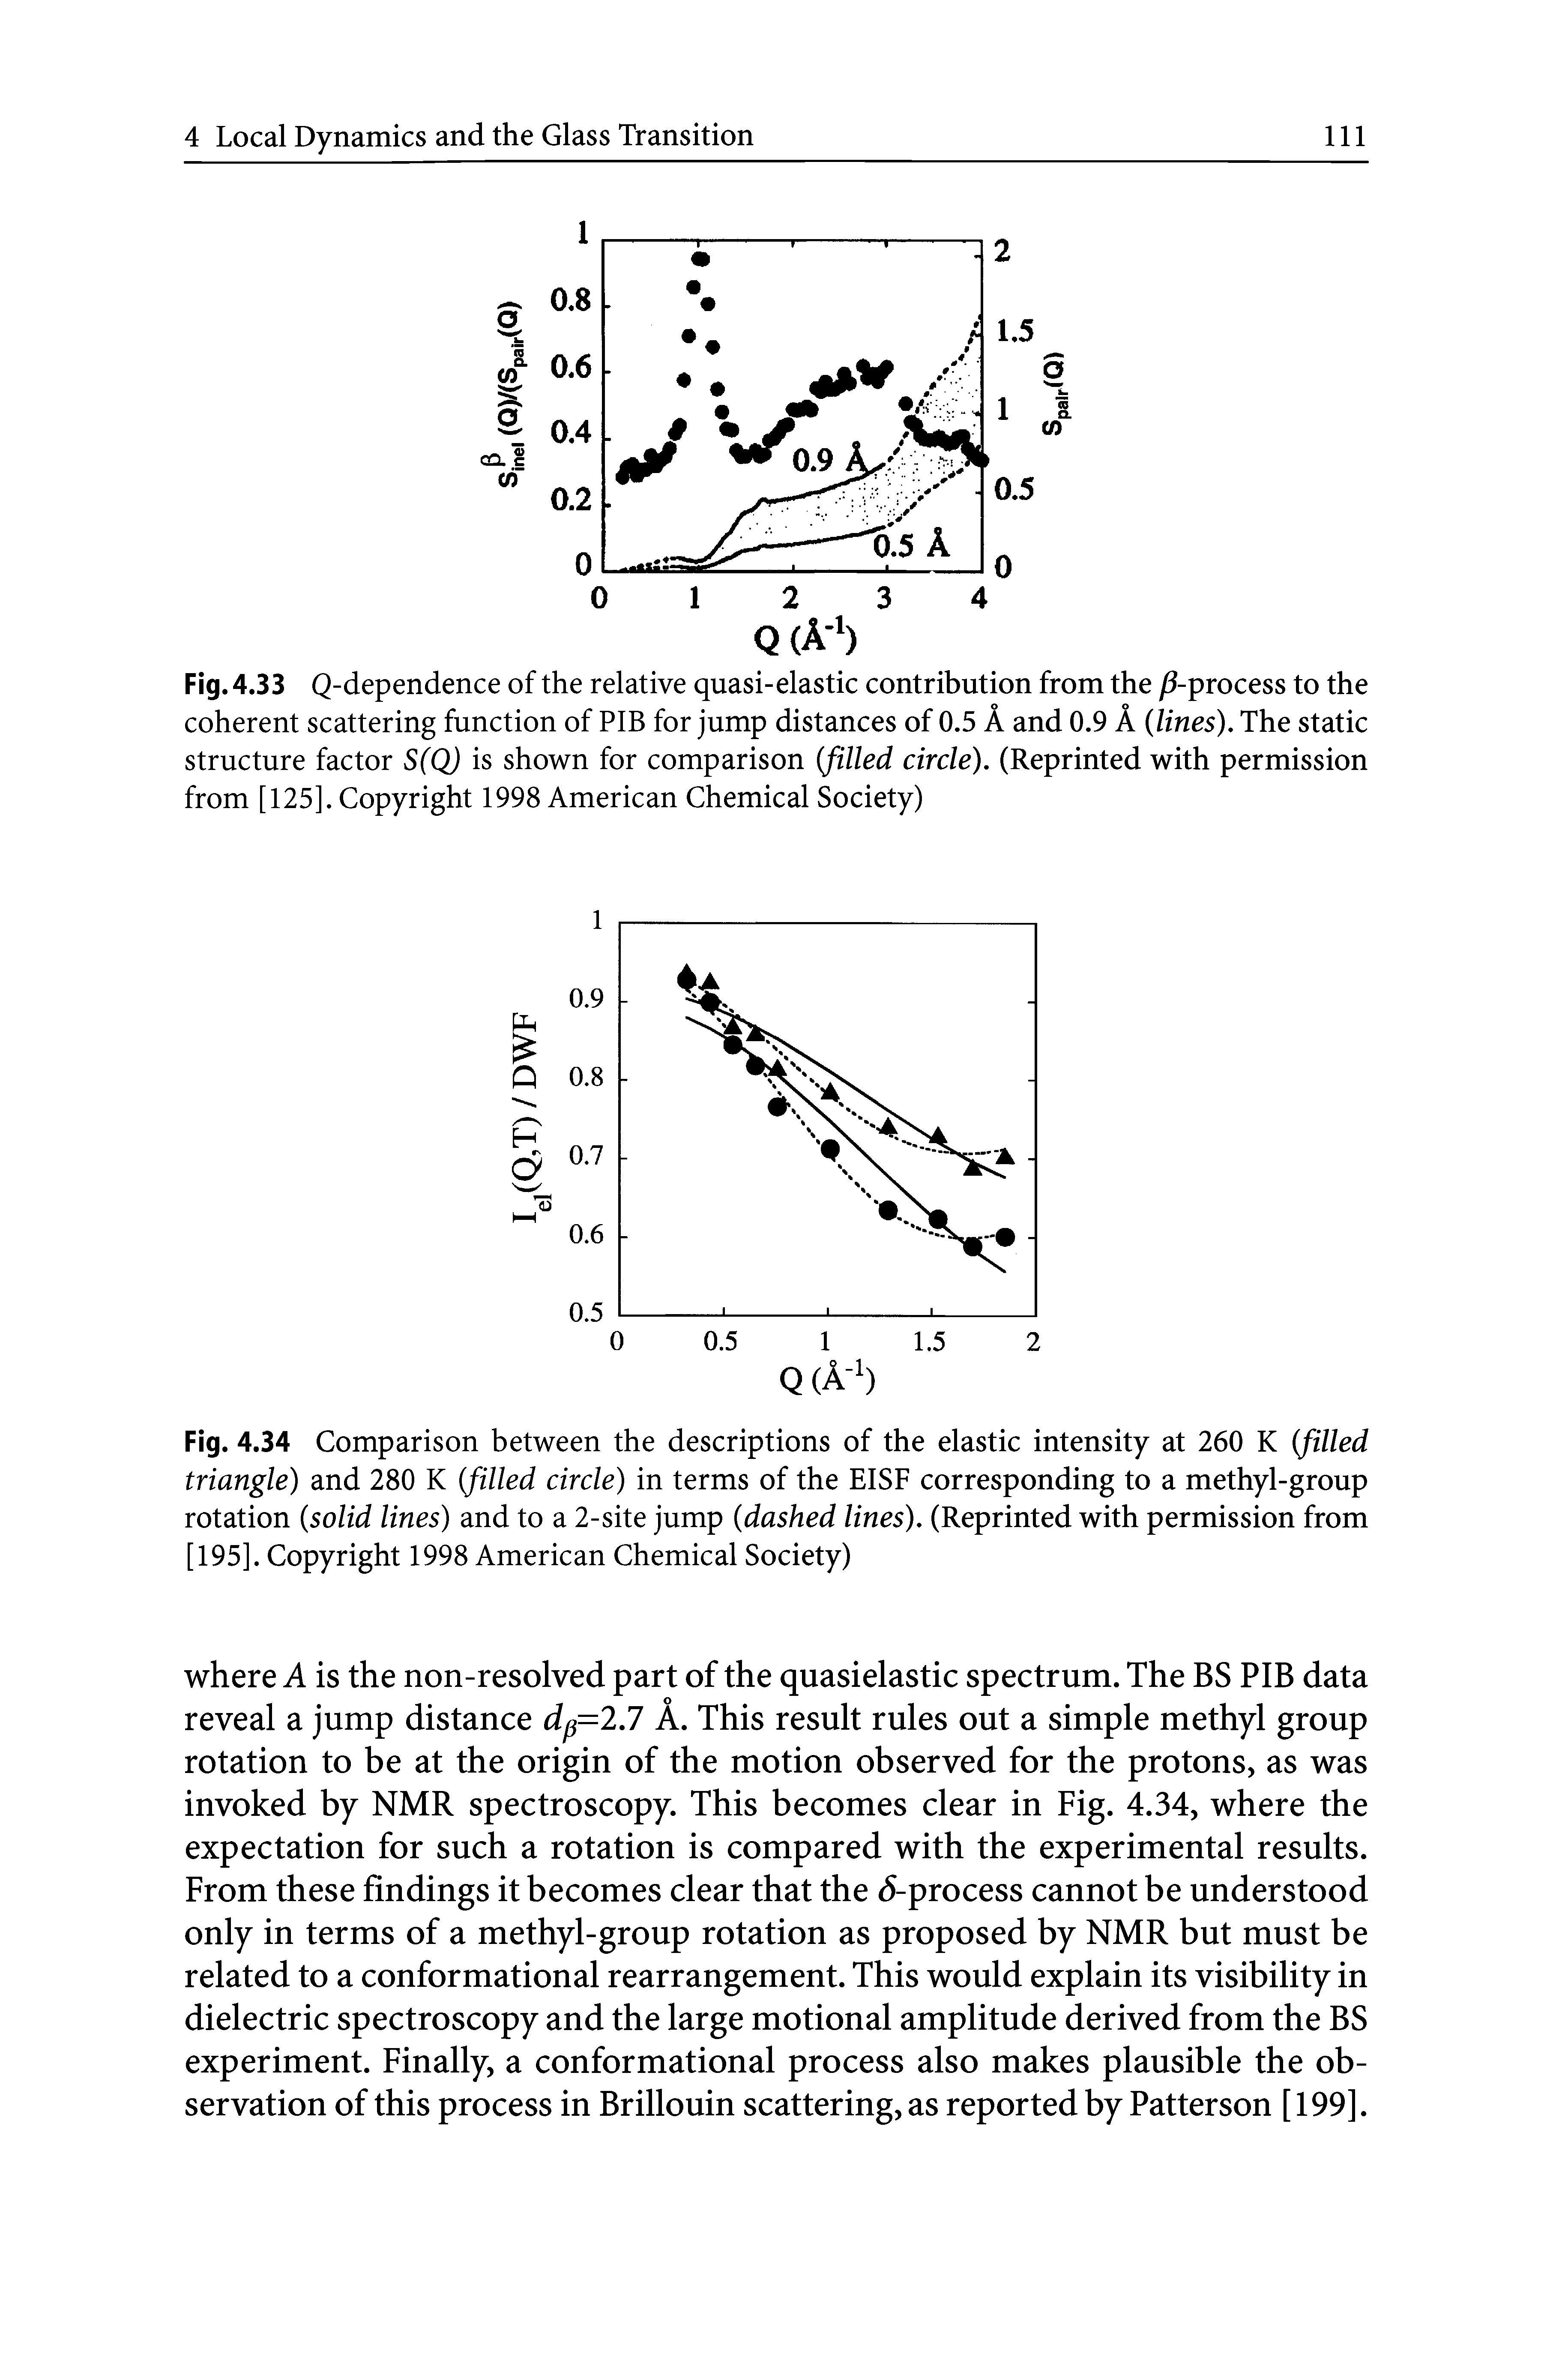 Fig. 4.33 Q-dependence of the relative quasi-elastic contribution from the -process to the coherent scattering function of PIB for jump distances of 0.5 A and 0.9 A (lines). The static structure factor S(Q) is shown for comparison (filled circle), (Reprinted with permission from [125]. Copyright 1998 American Chemical Society)...